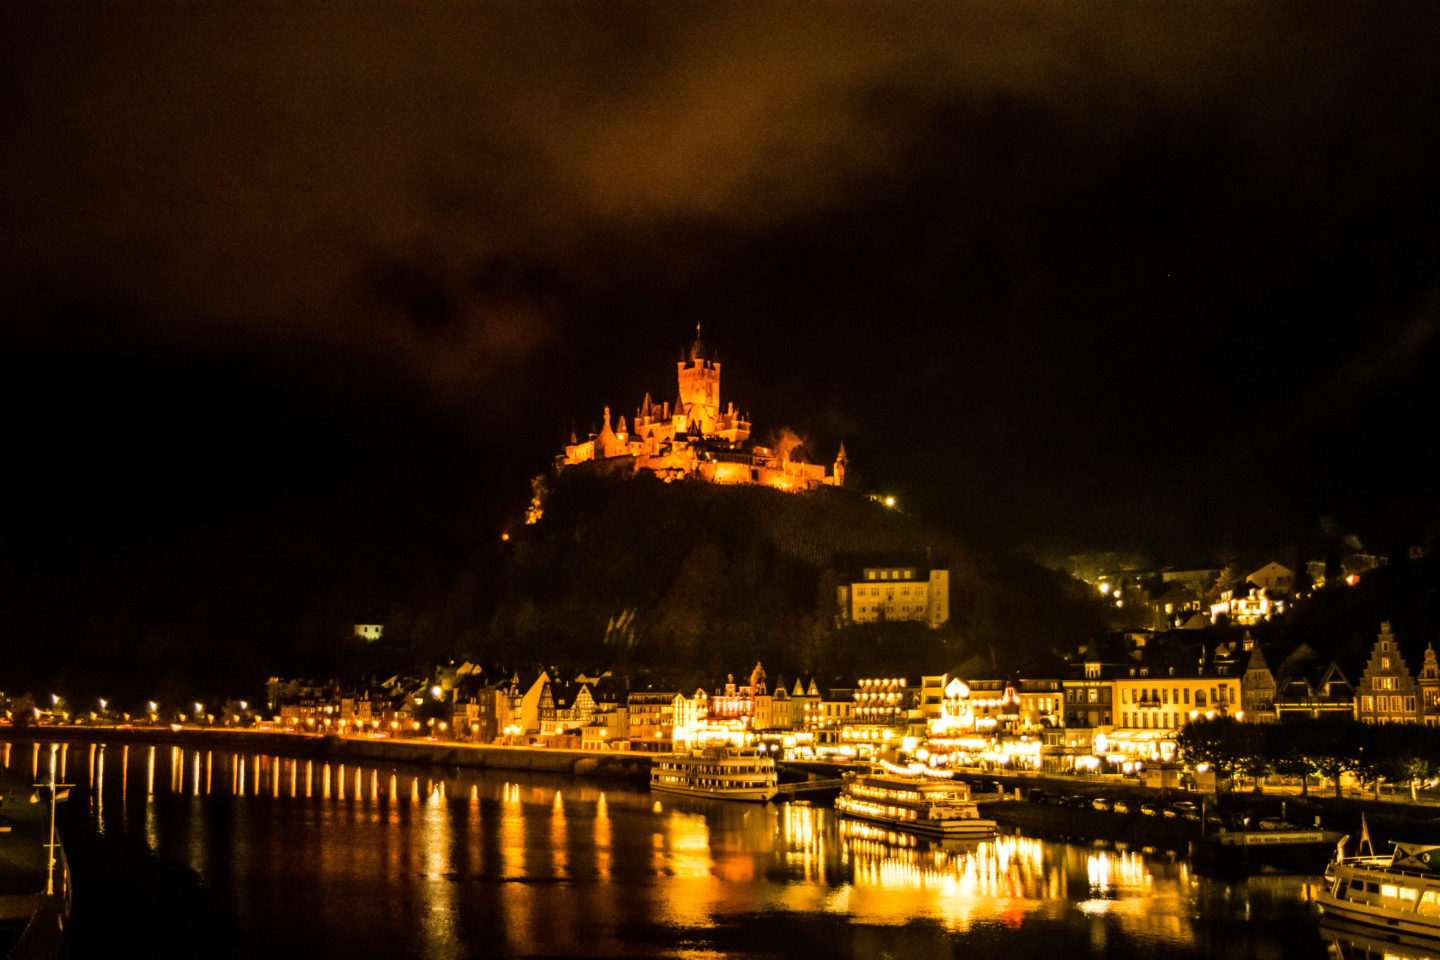 The Cochem Castle lit up at night